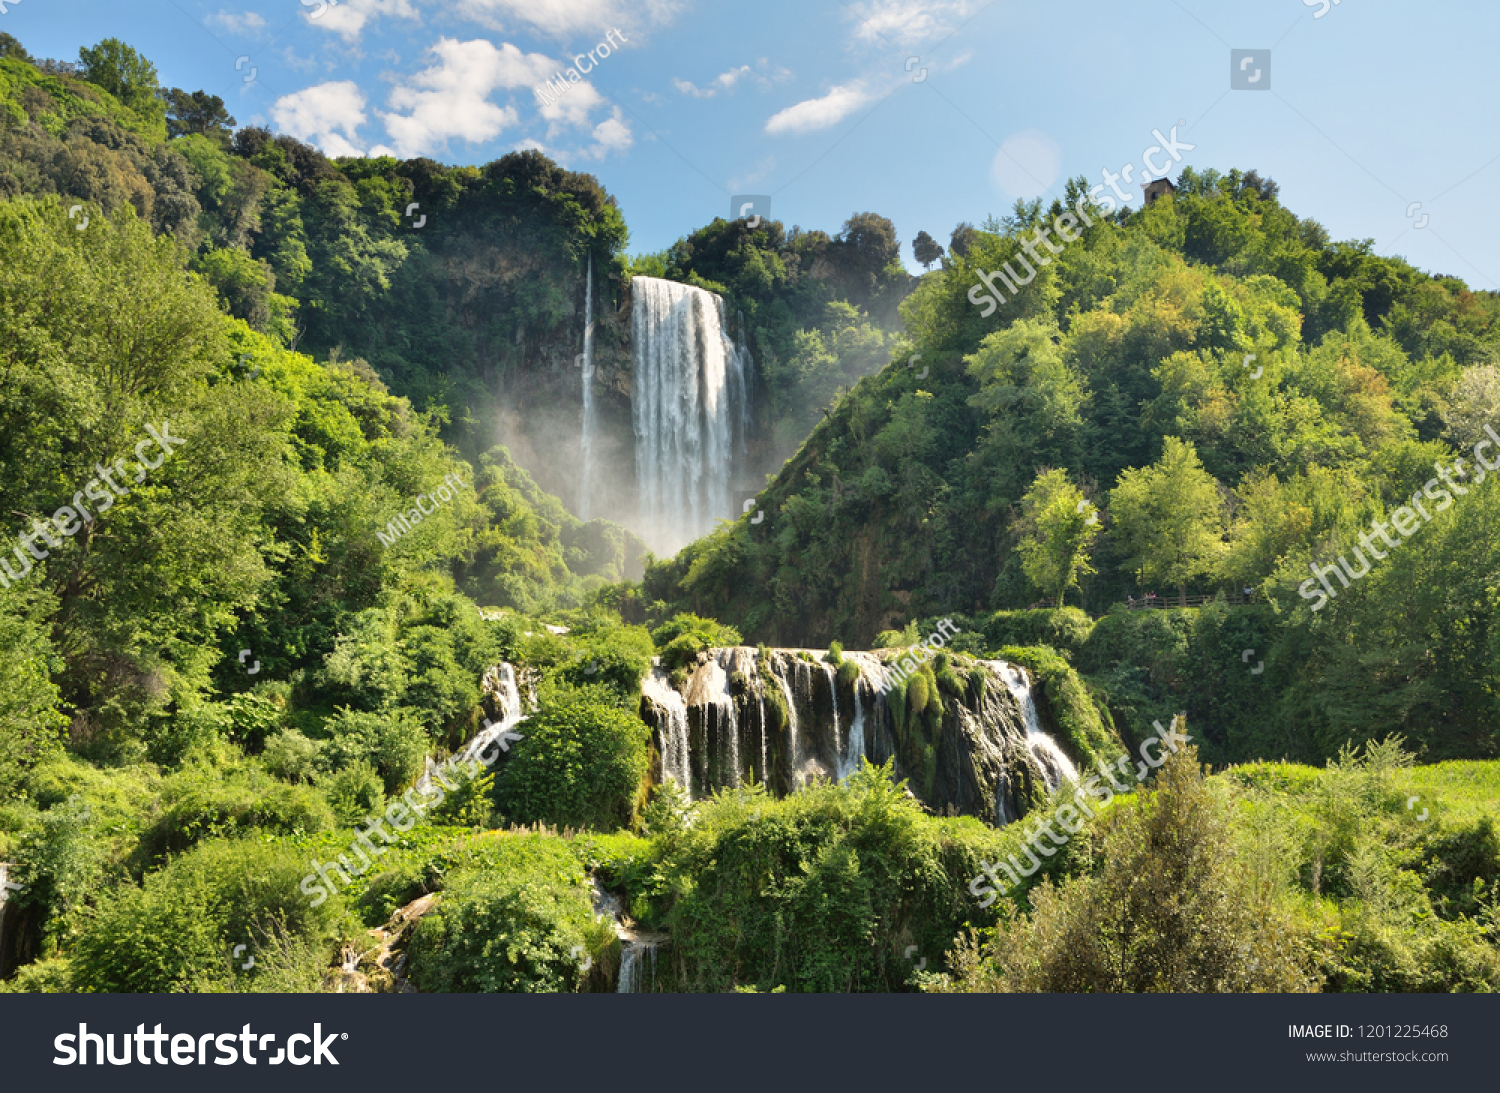 The Cascata delle Marmore (Marmore Falls) is a man-made waterfall created by the ancient Romans located near Terni in Umbria region, Italy. The waters are used to fuel an hydroelectric power plant #1201225468